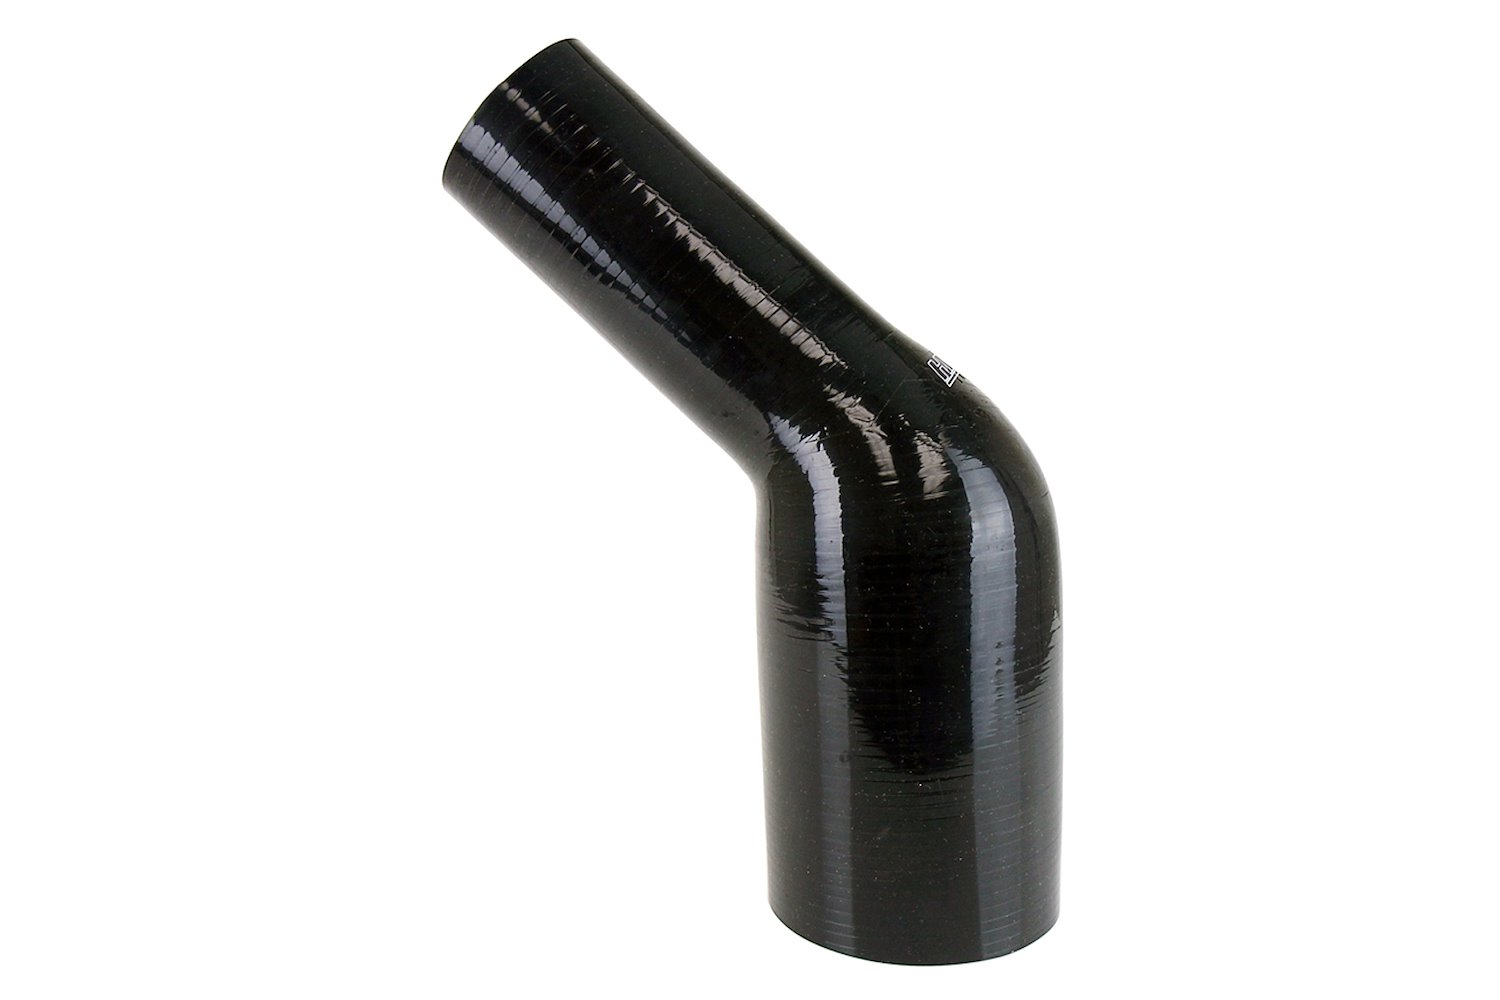 HTSER45-187-212-BLK Silicone 45-Degree Elbow Hose, High-Temp Reinforced, 1-7/8 in. - 2-1/8 in. ID, Black